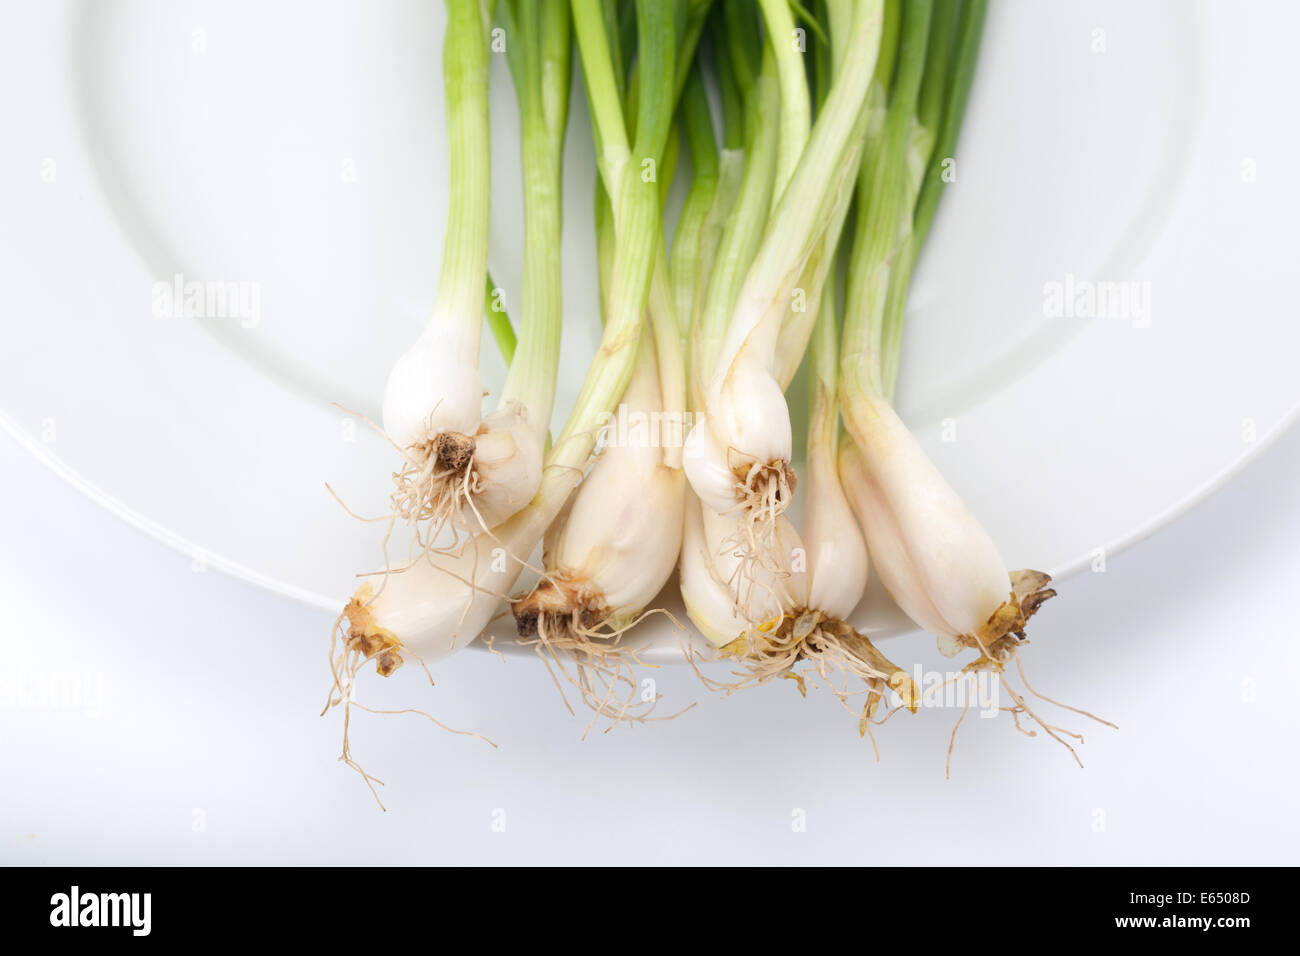 spring onion or chive on white background Stock Photo